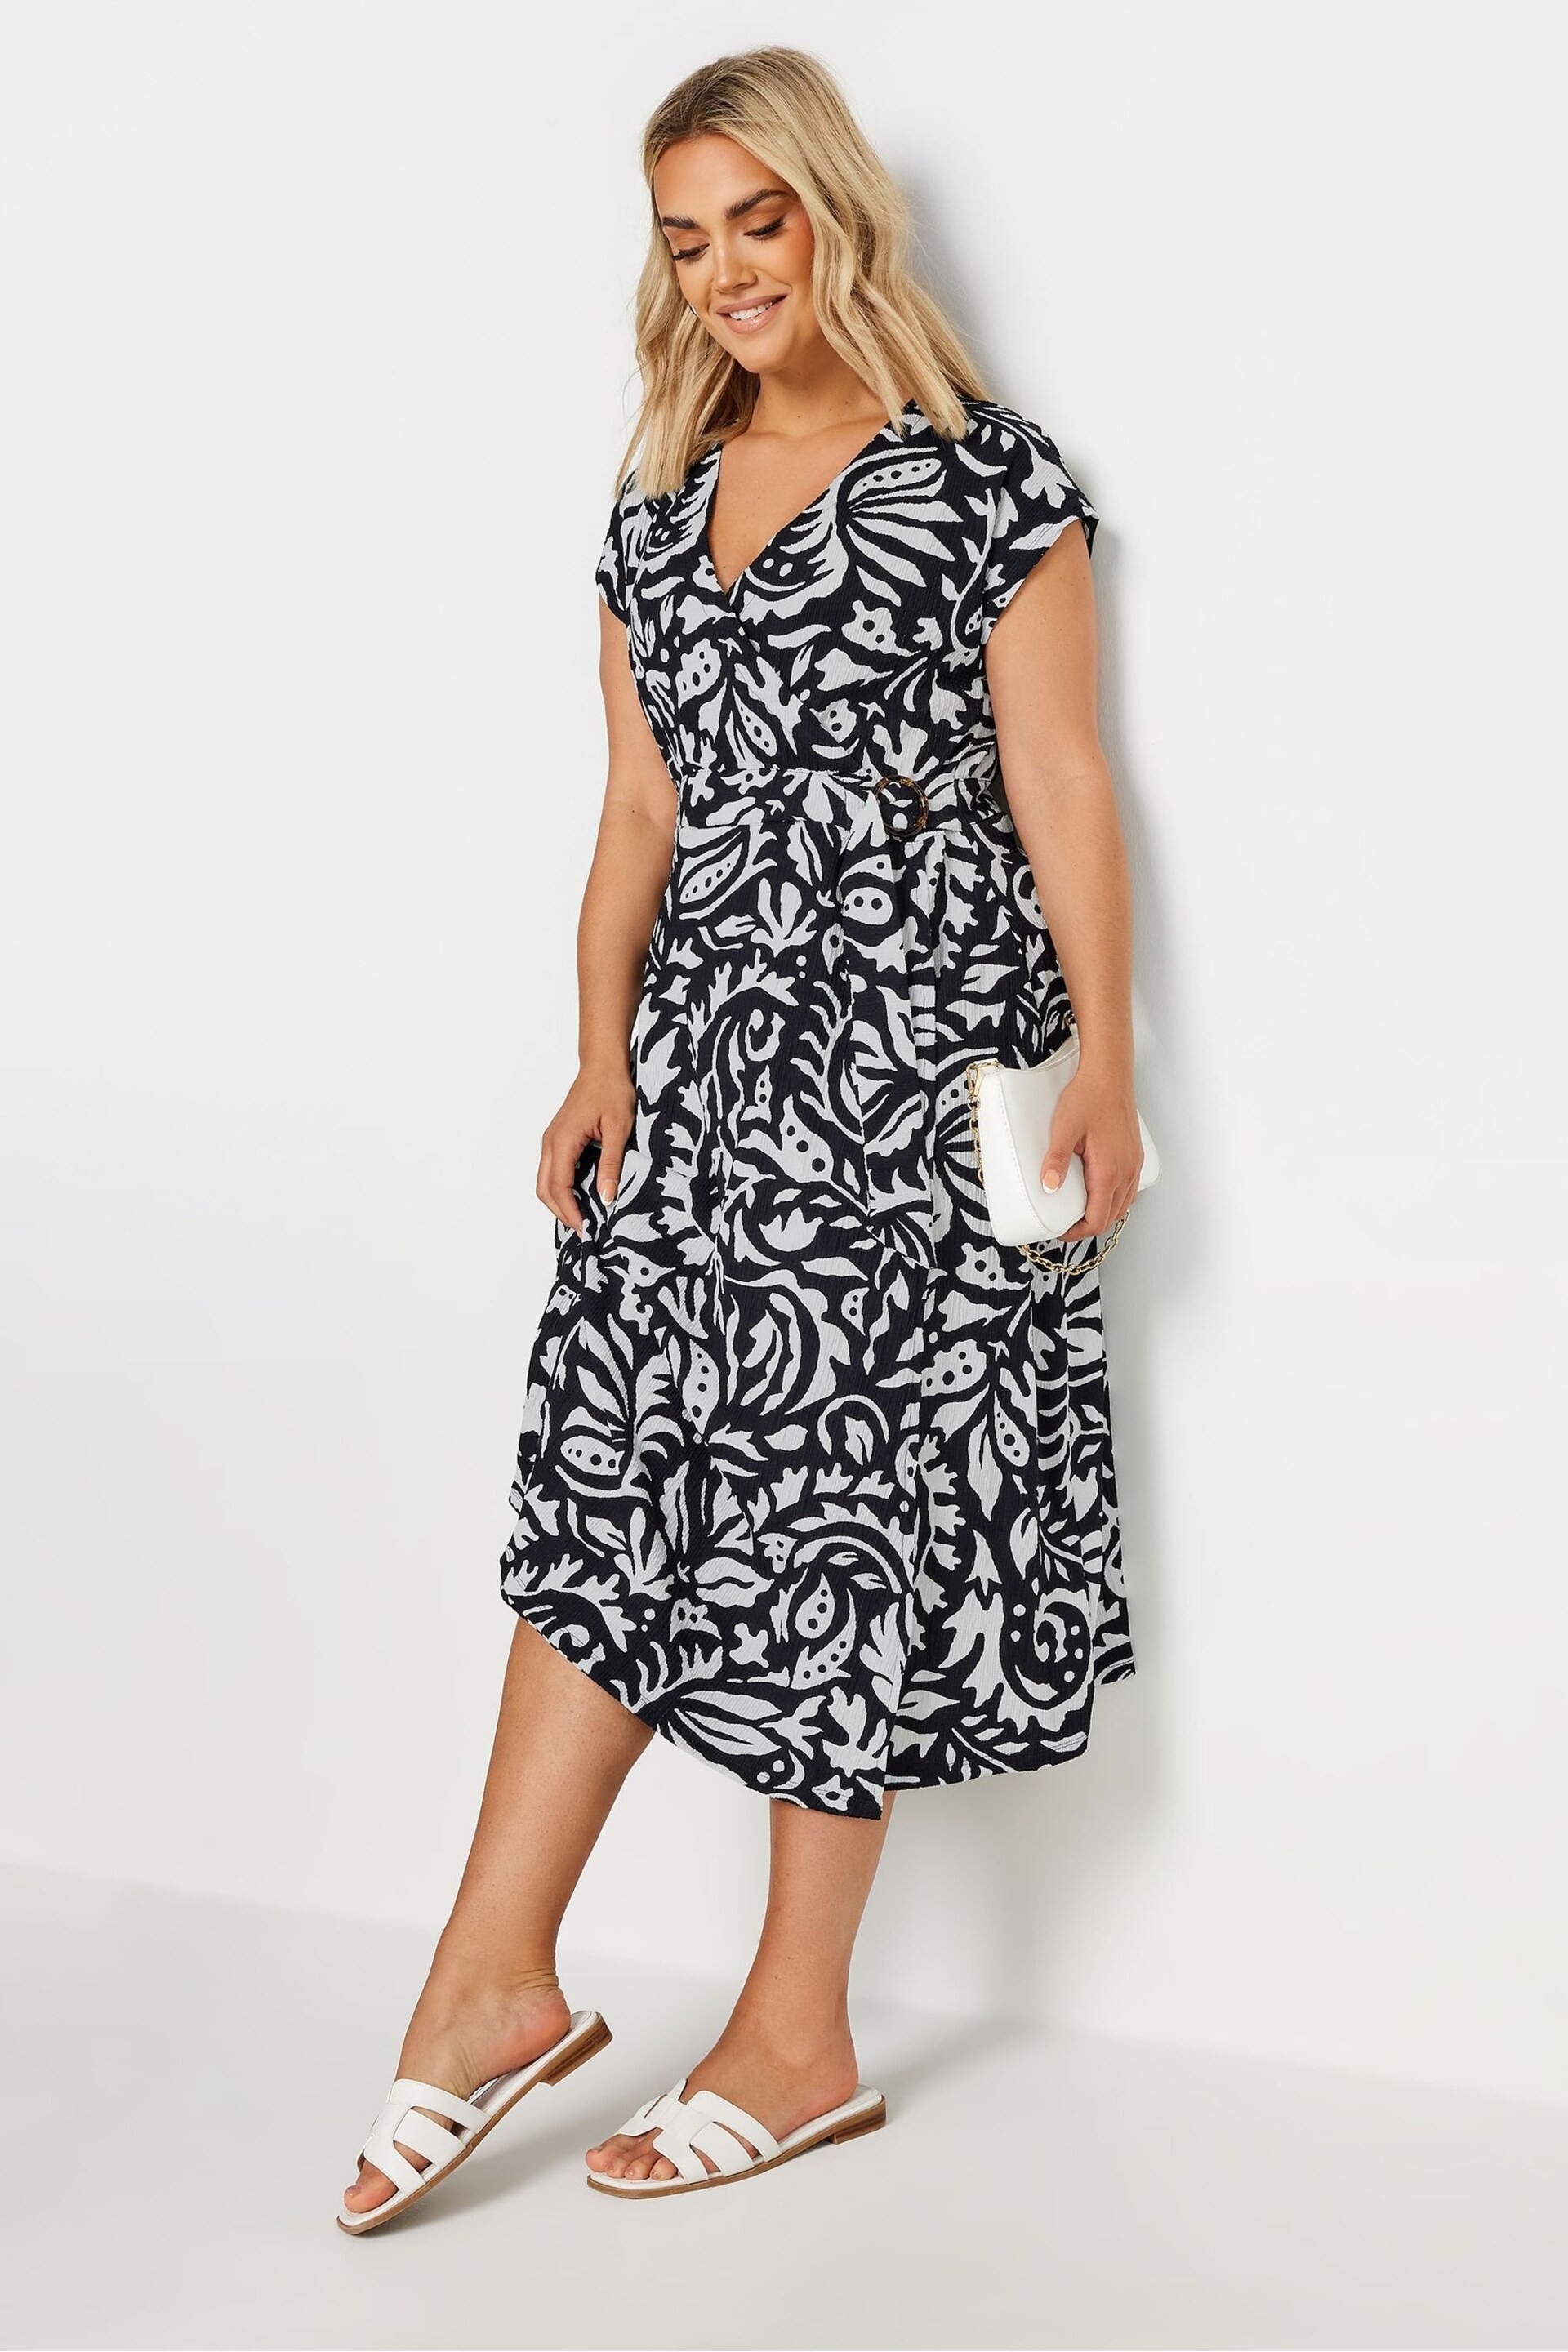 Yours Curve Black & White Floral Print Wrap Dress - Image 2 of 5